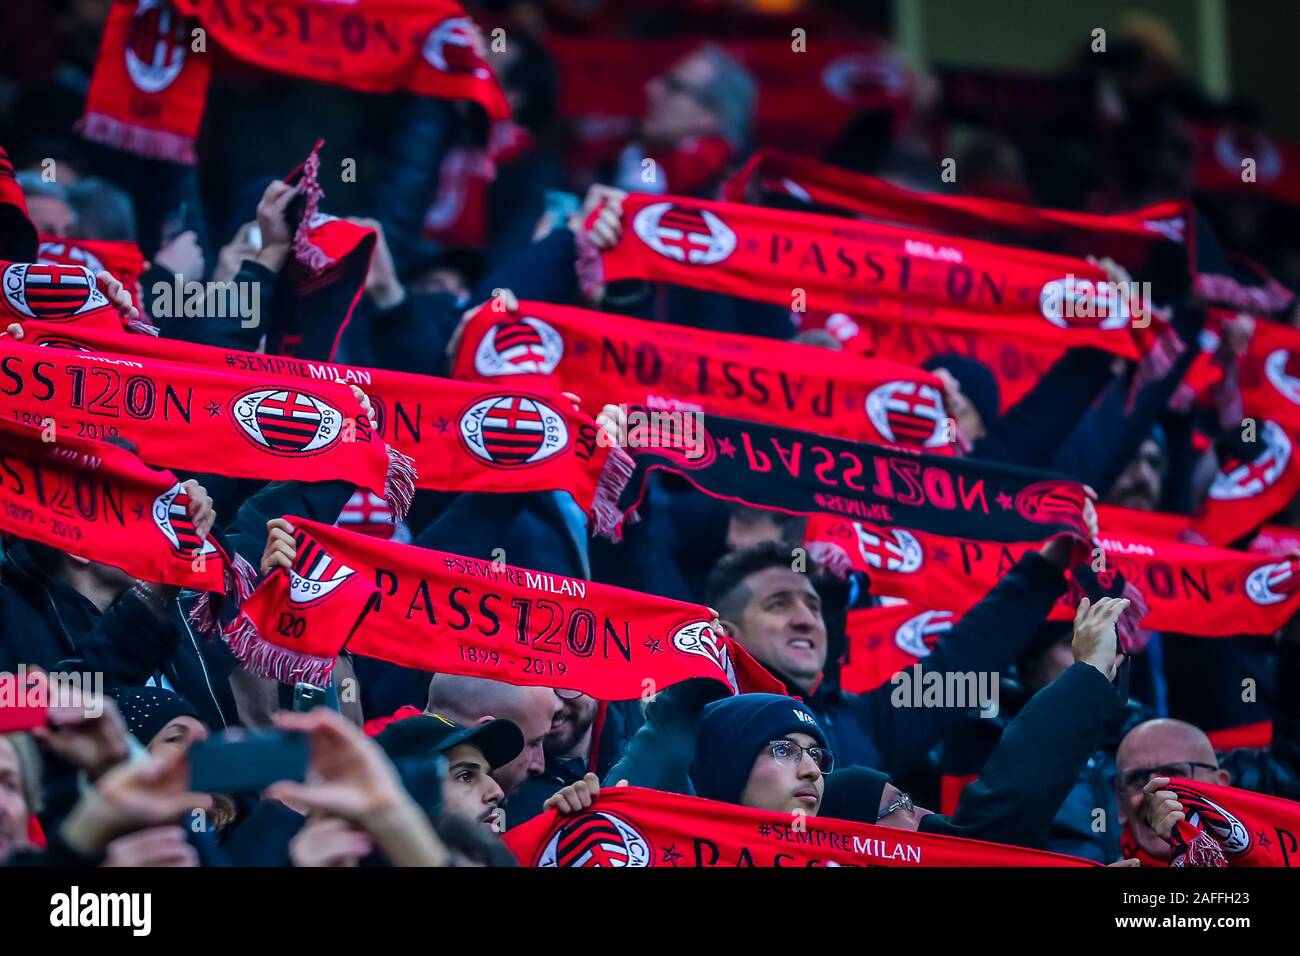 Page 4 - Milan Ac Fans High Resolution Stock Photography and Images - Alamy